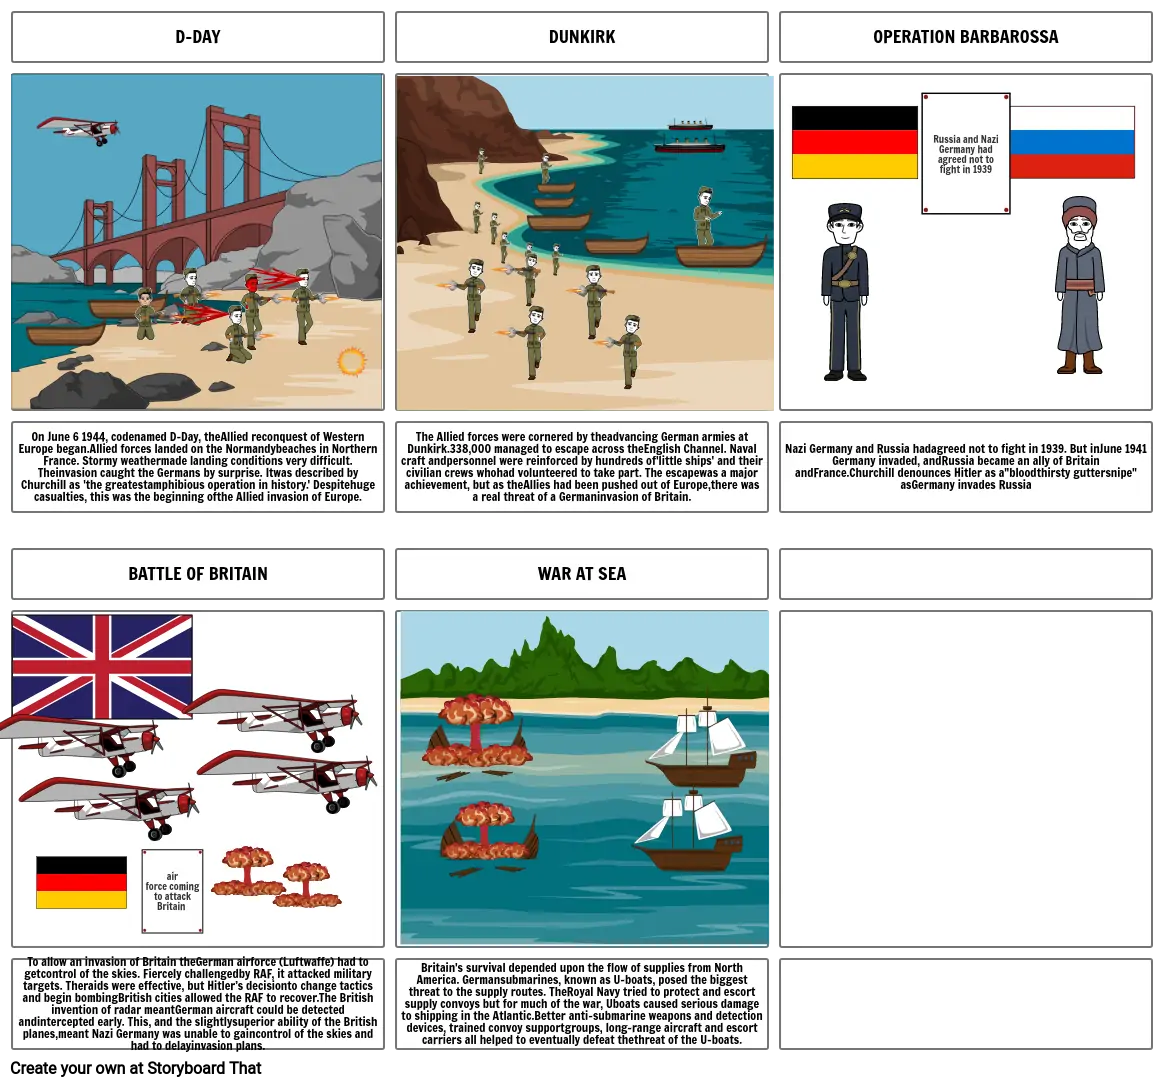 D-day story board